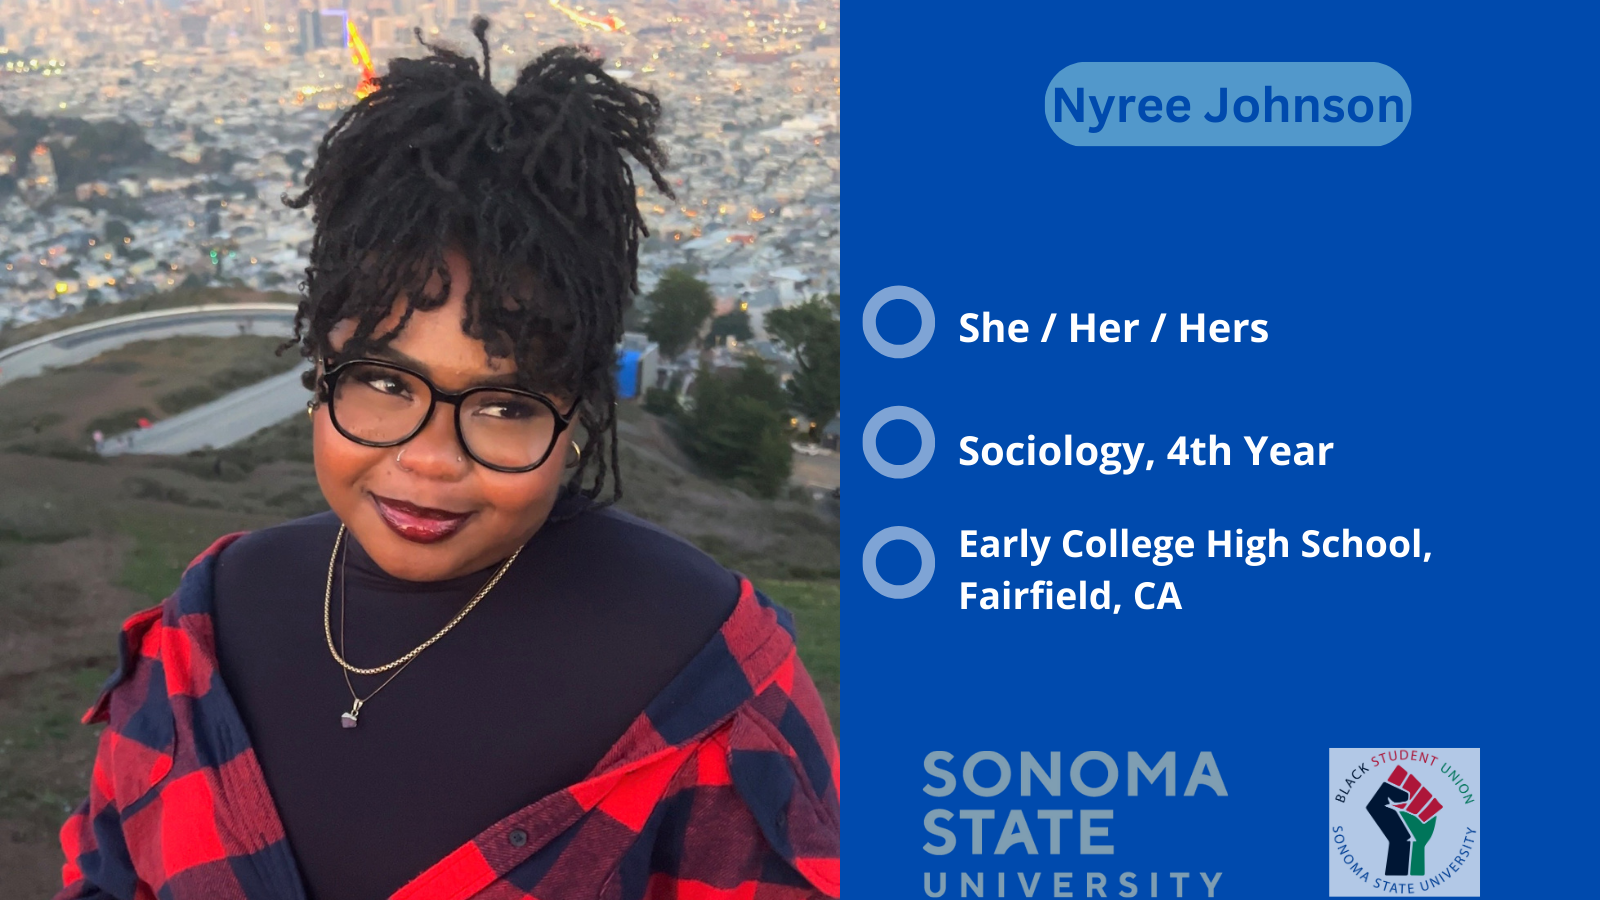 Nyree Johnson, Class of 2023. Hometown: Early College High School, Fairfield, CA.